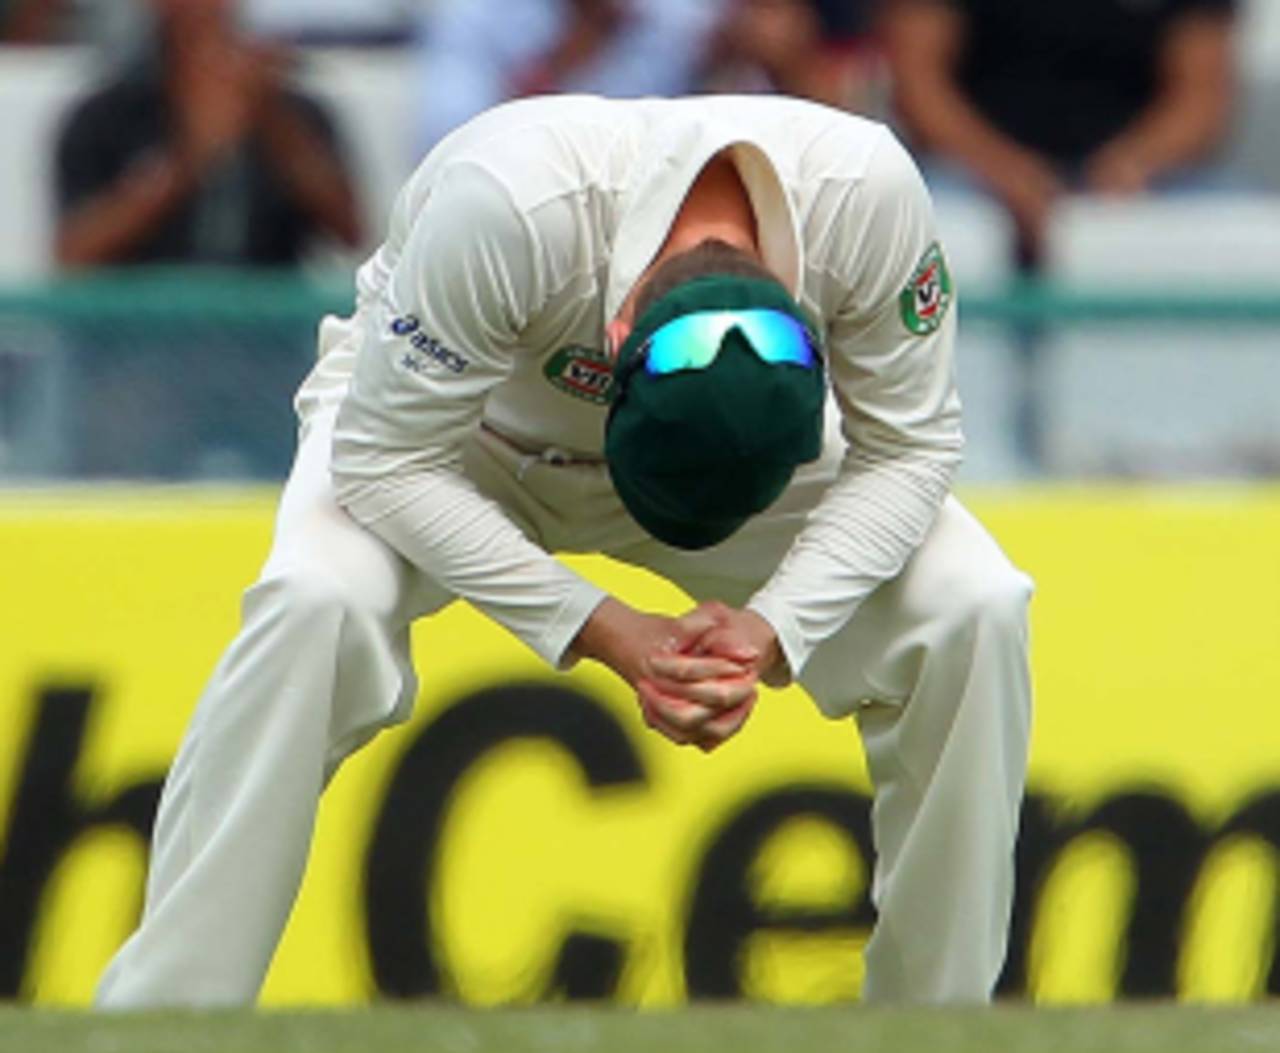 Michael Clarke's reaction of disapproval as India's openers scored freely, India v Australia, 3rd Test, Mohali, 3rd day, March 16, 2013